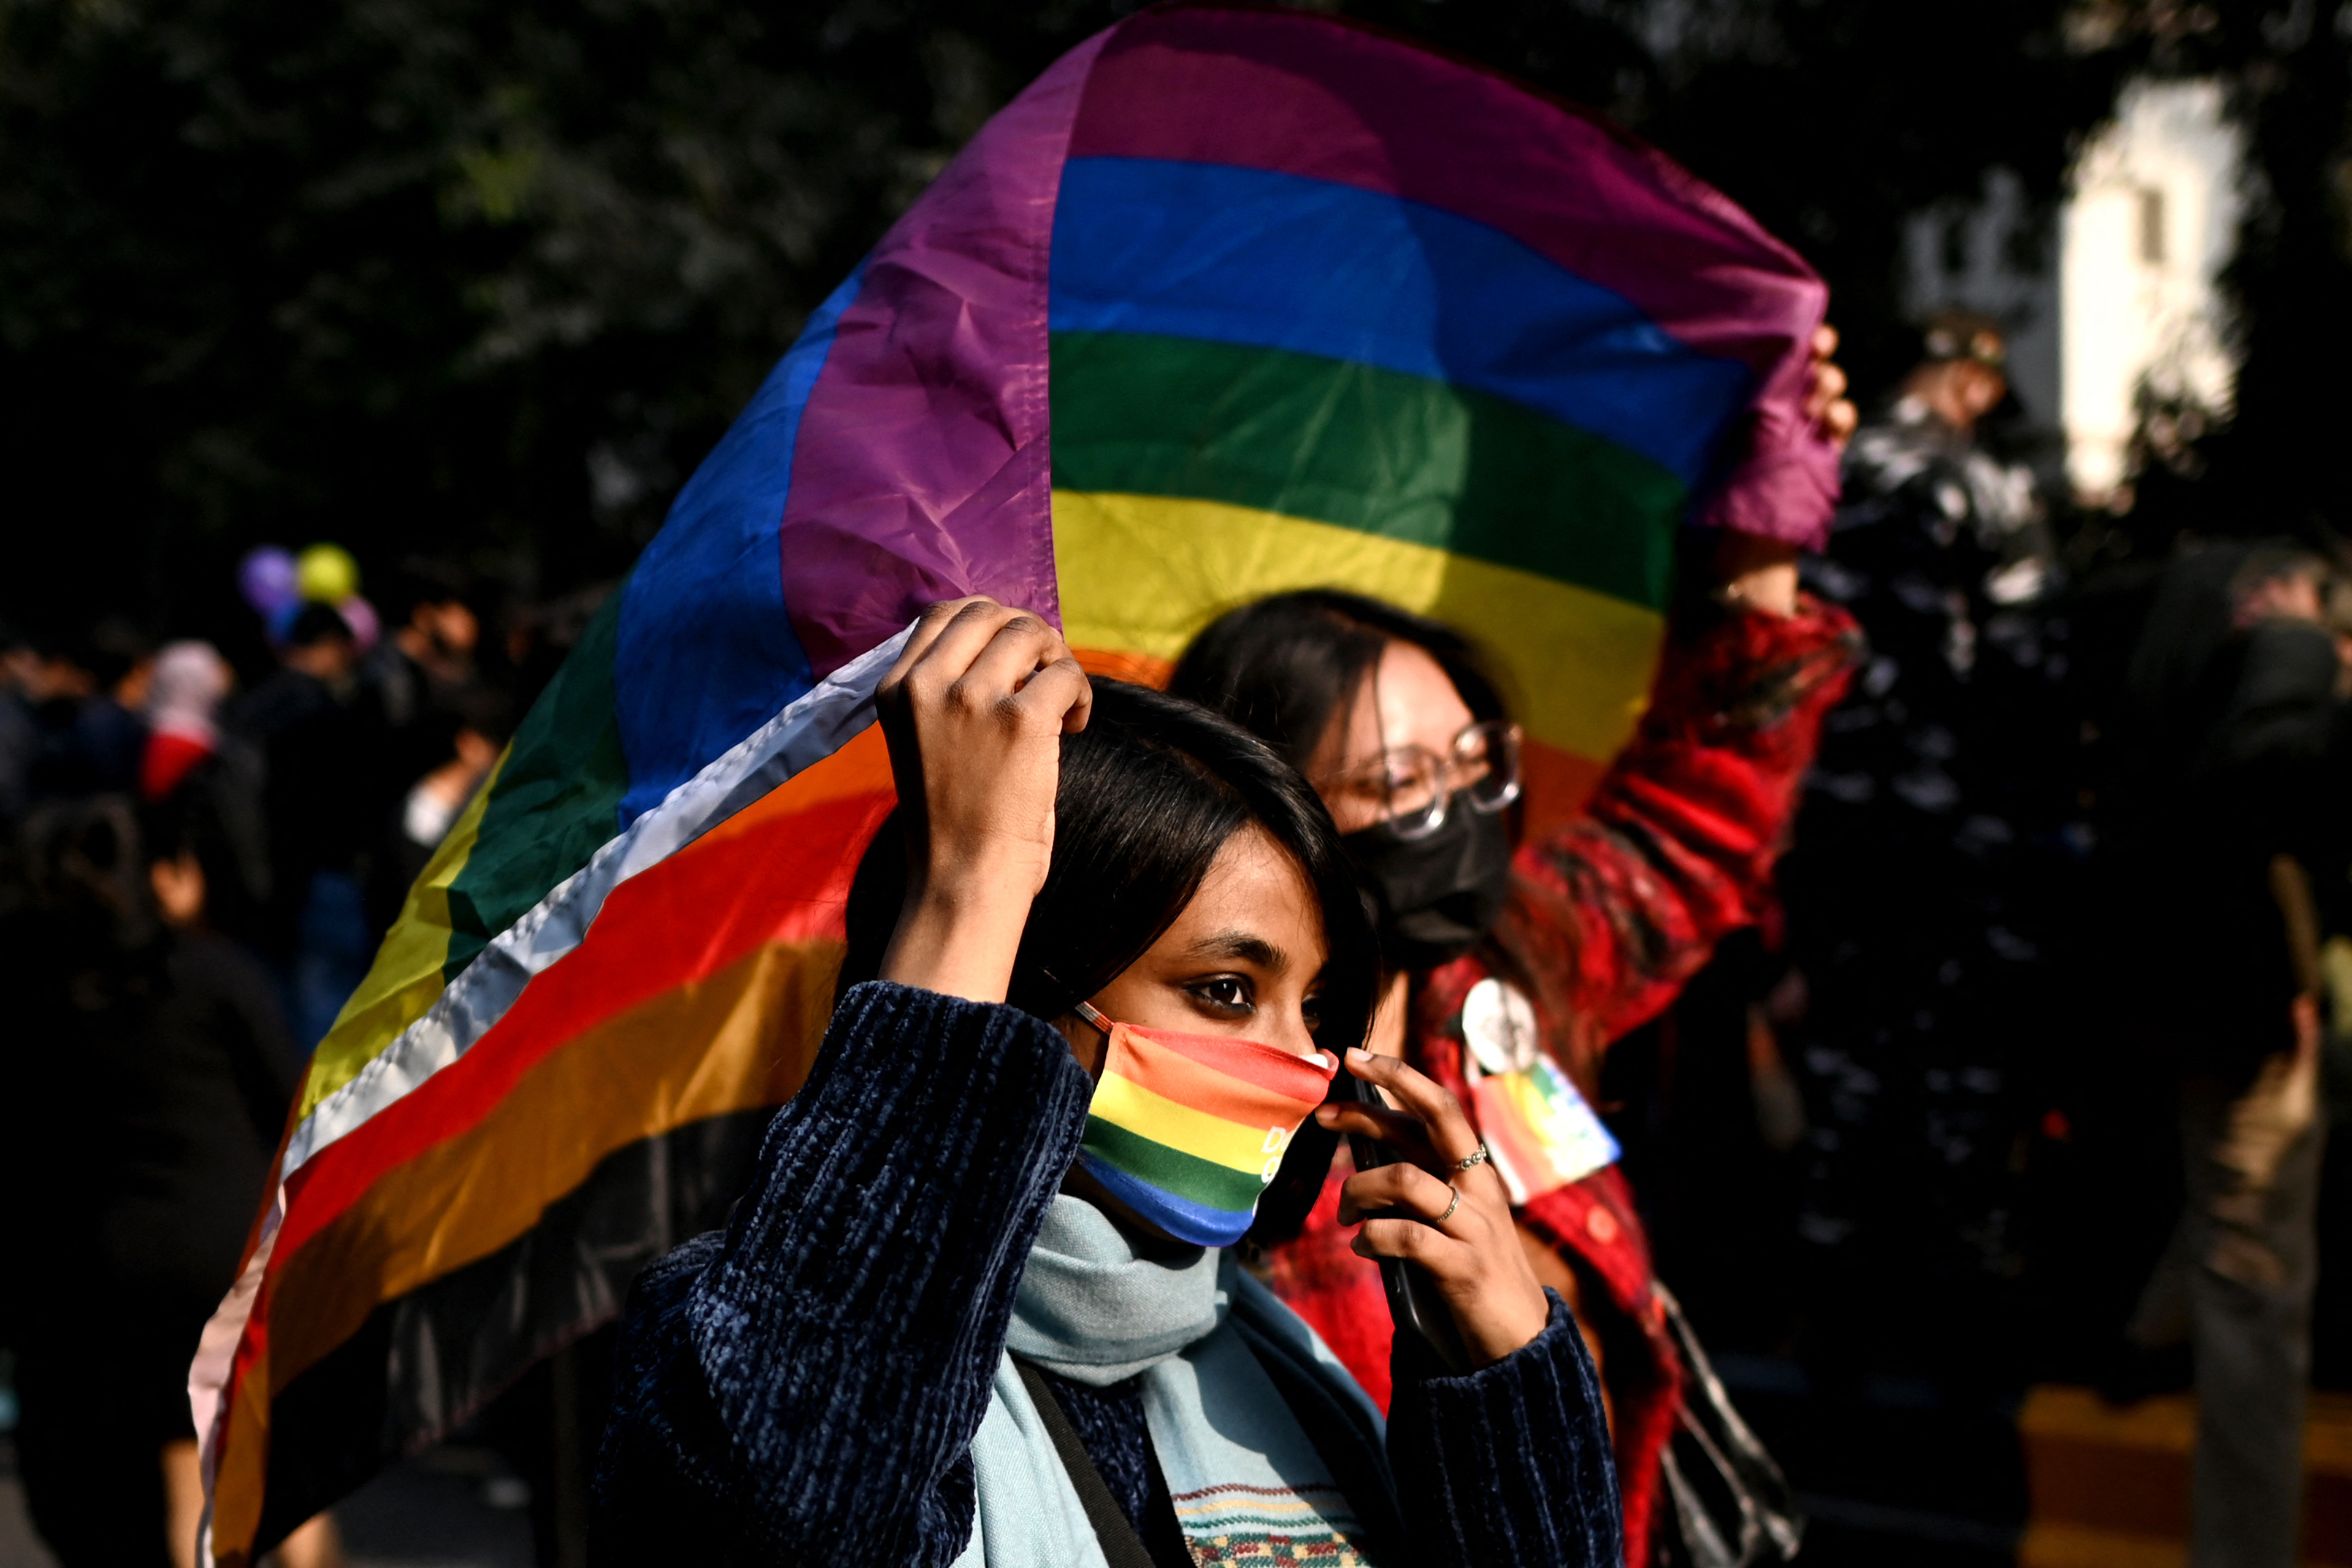 Members and supporters of the LGBTQ community take part in a Pride parade in New Delhi, Jan. 8, 2023. (Sajjad Hussain—AFP/Getty Images)